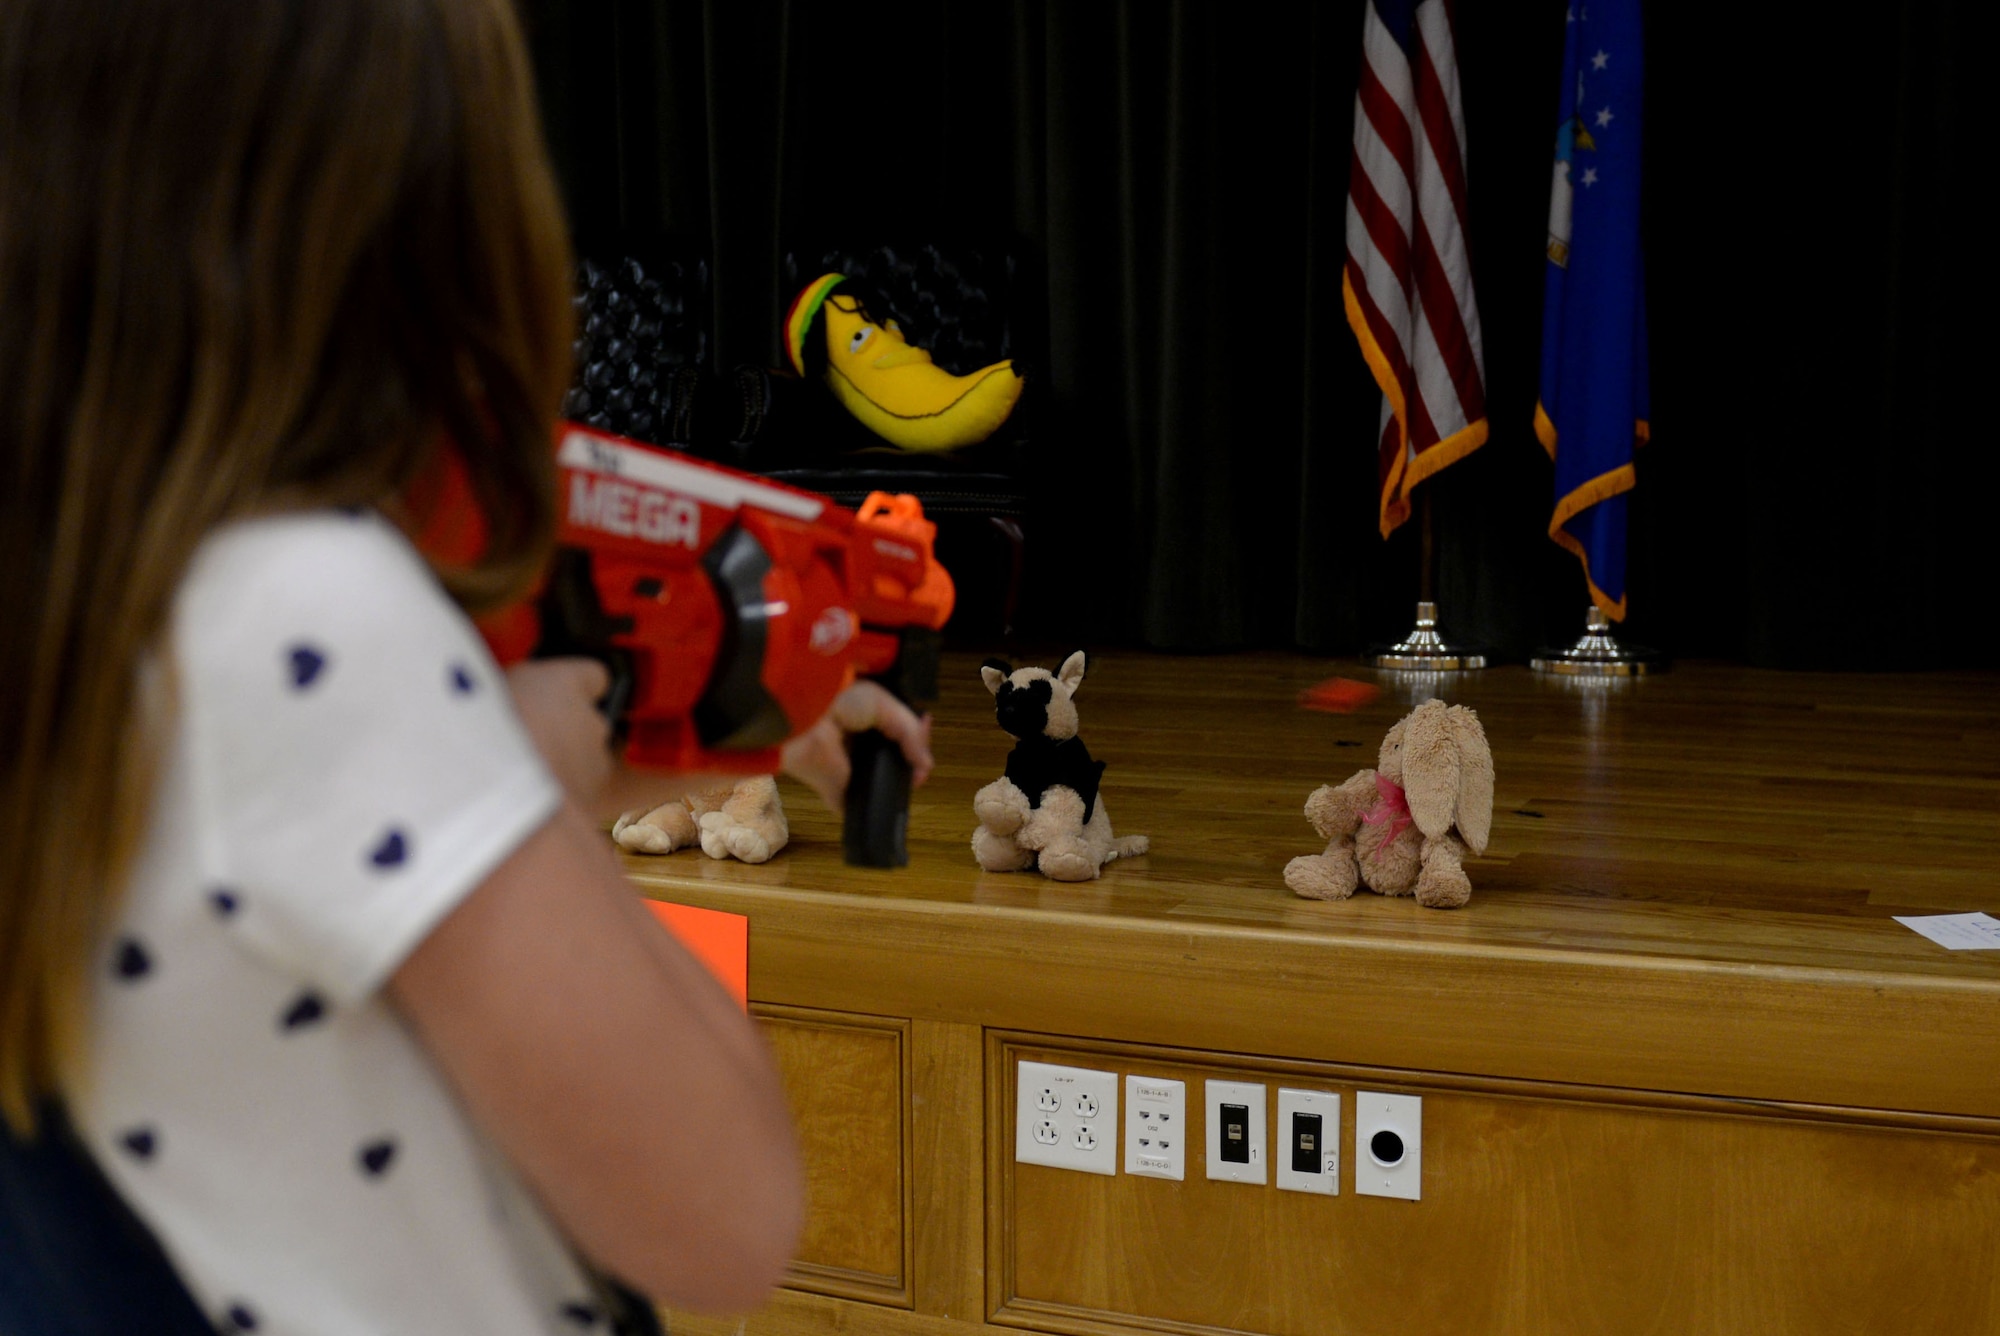 A young girl wearing a white shirt with blue hearts points a dart gun at stuffed animals on a stage.